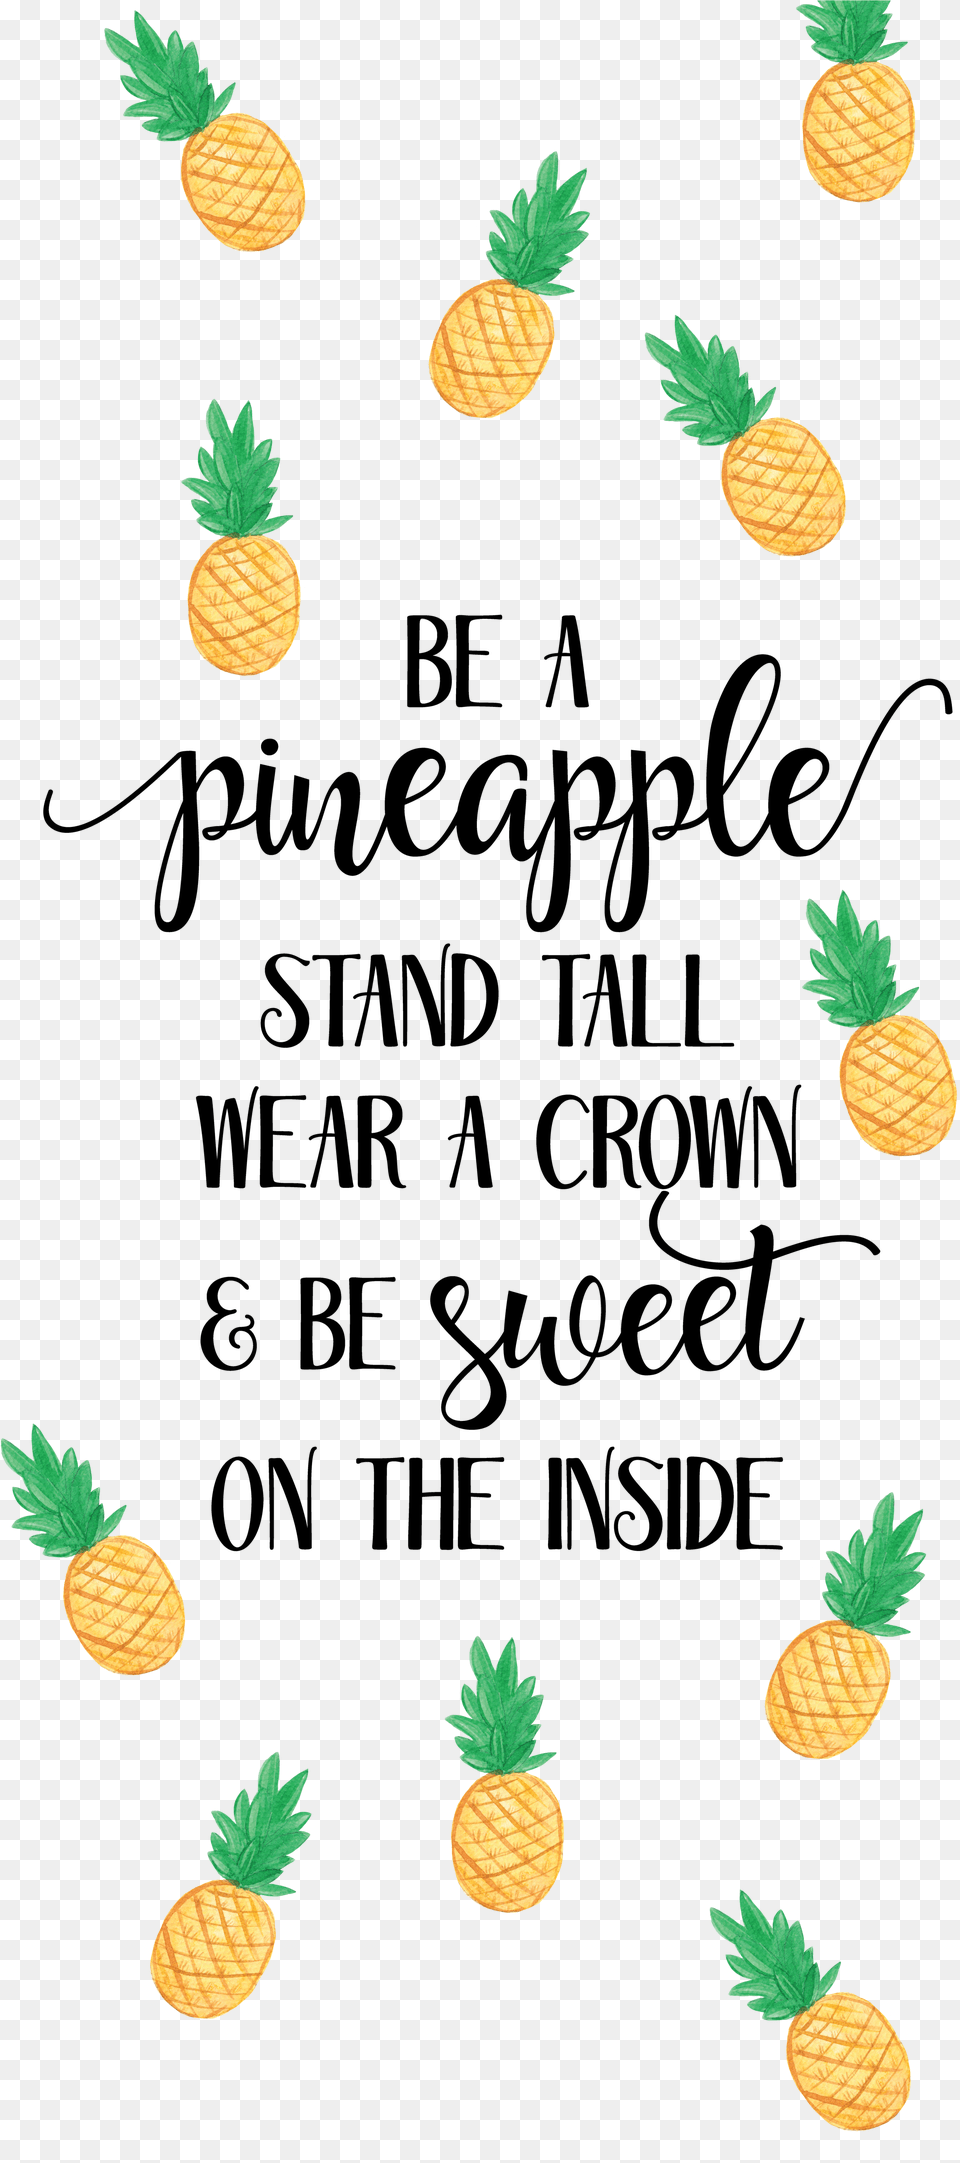 Pineapple Wallpaper Hd Wallpapers Pineapple Wallpaper Quotes, Tree, Leaf, Plant, Food Free Transparent Png